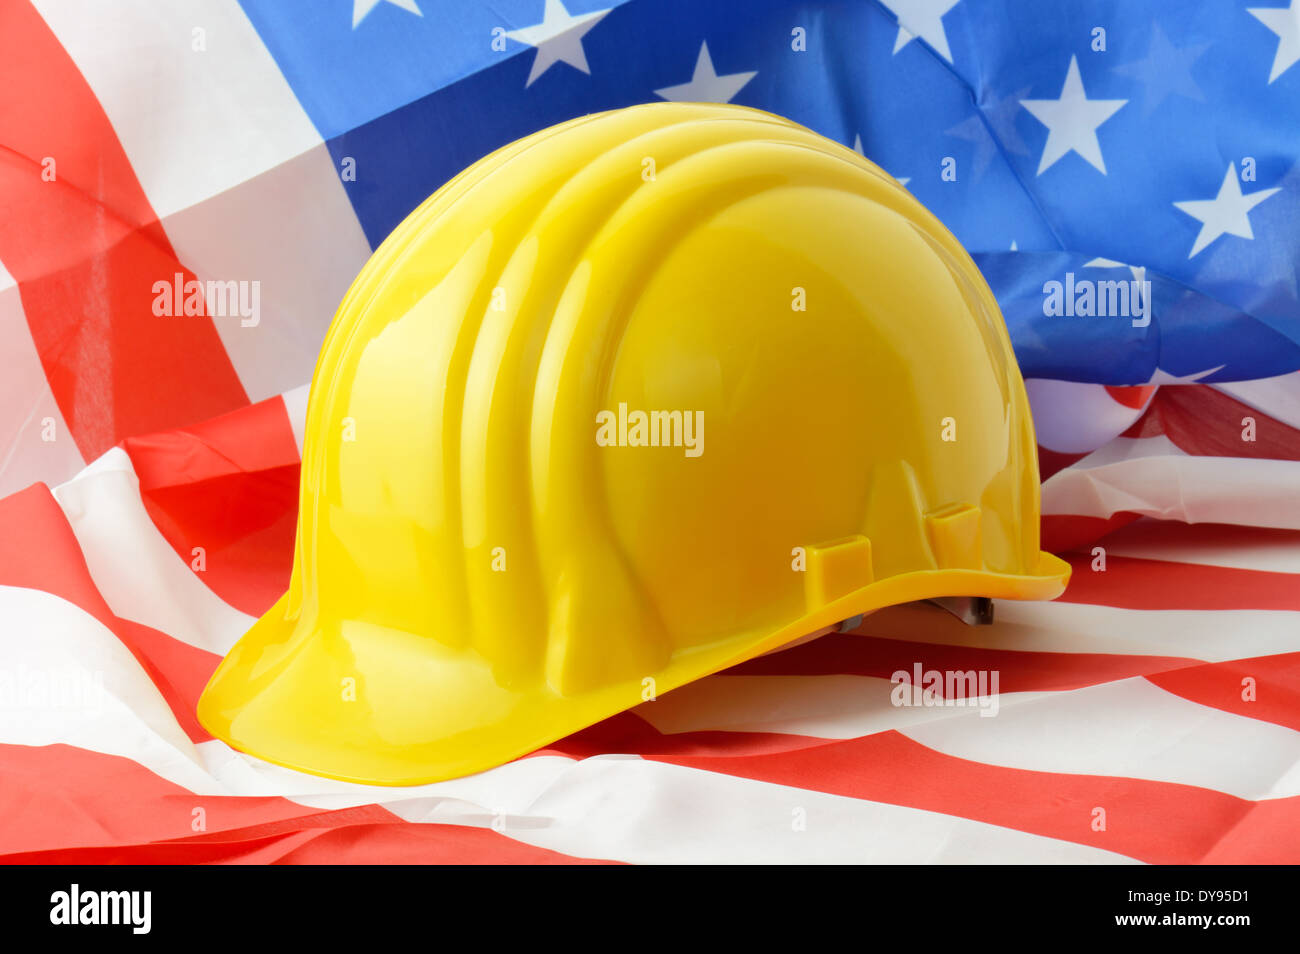 Hard hat on a american flag a symbol of construction Stock Photo